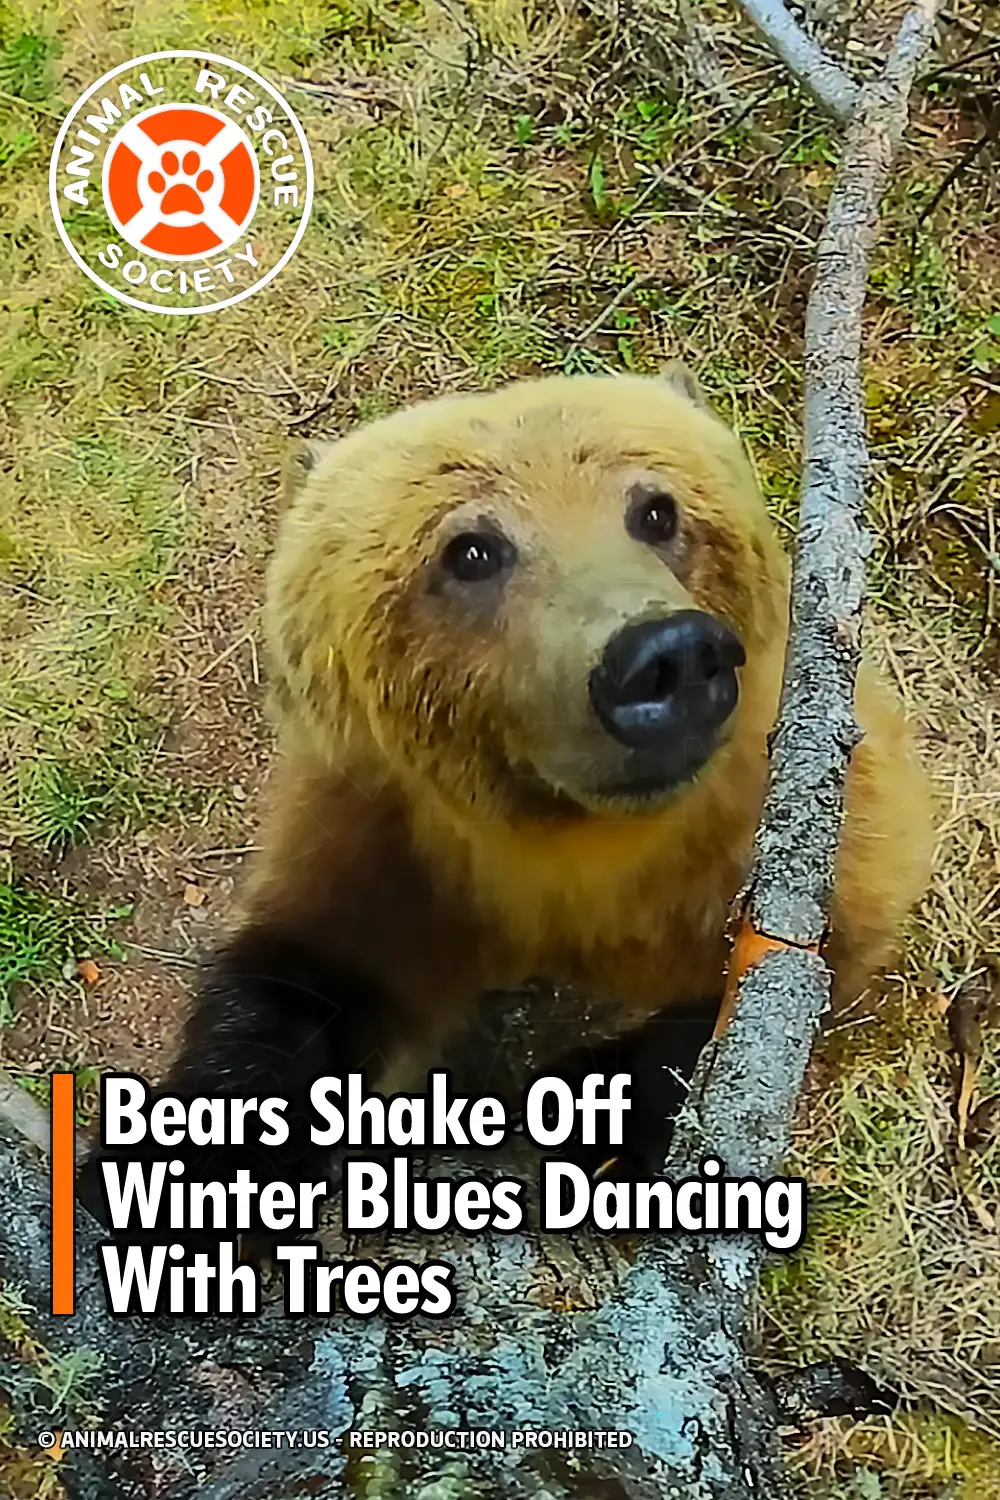 Bears Shake Off Winter Blues Dancing With Trees